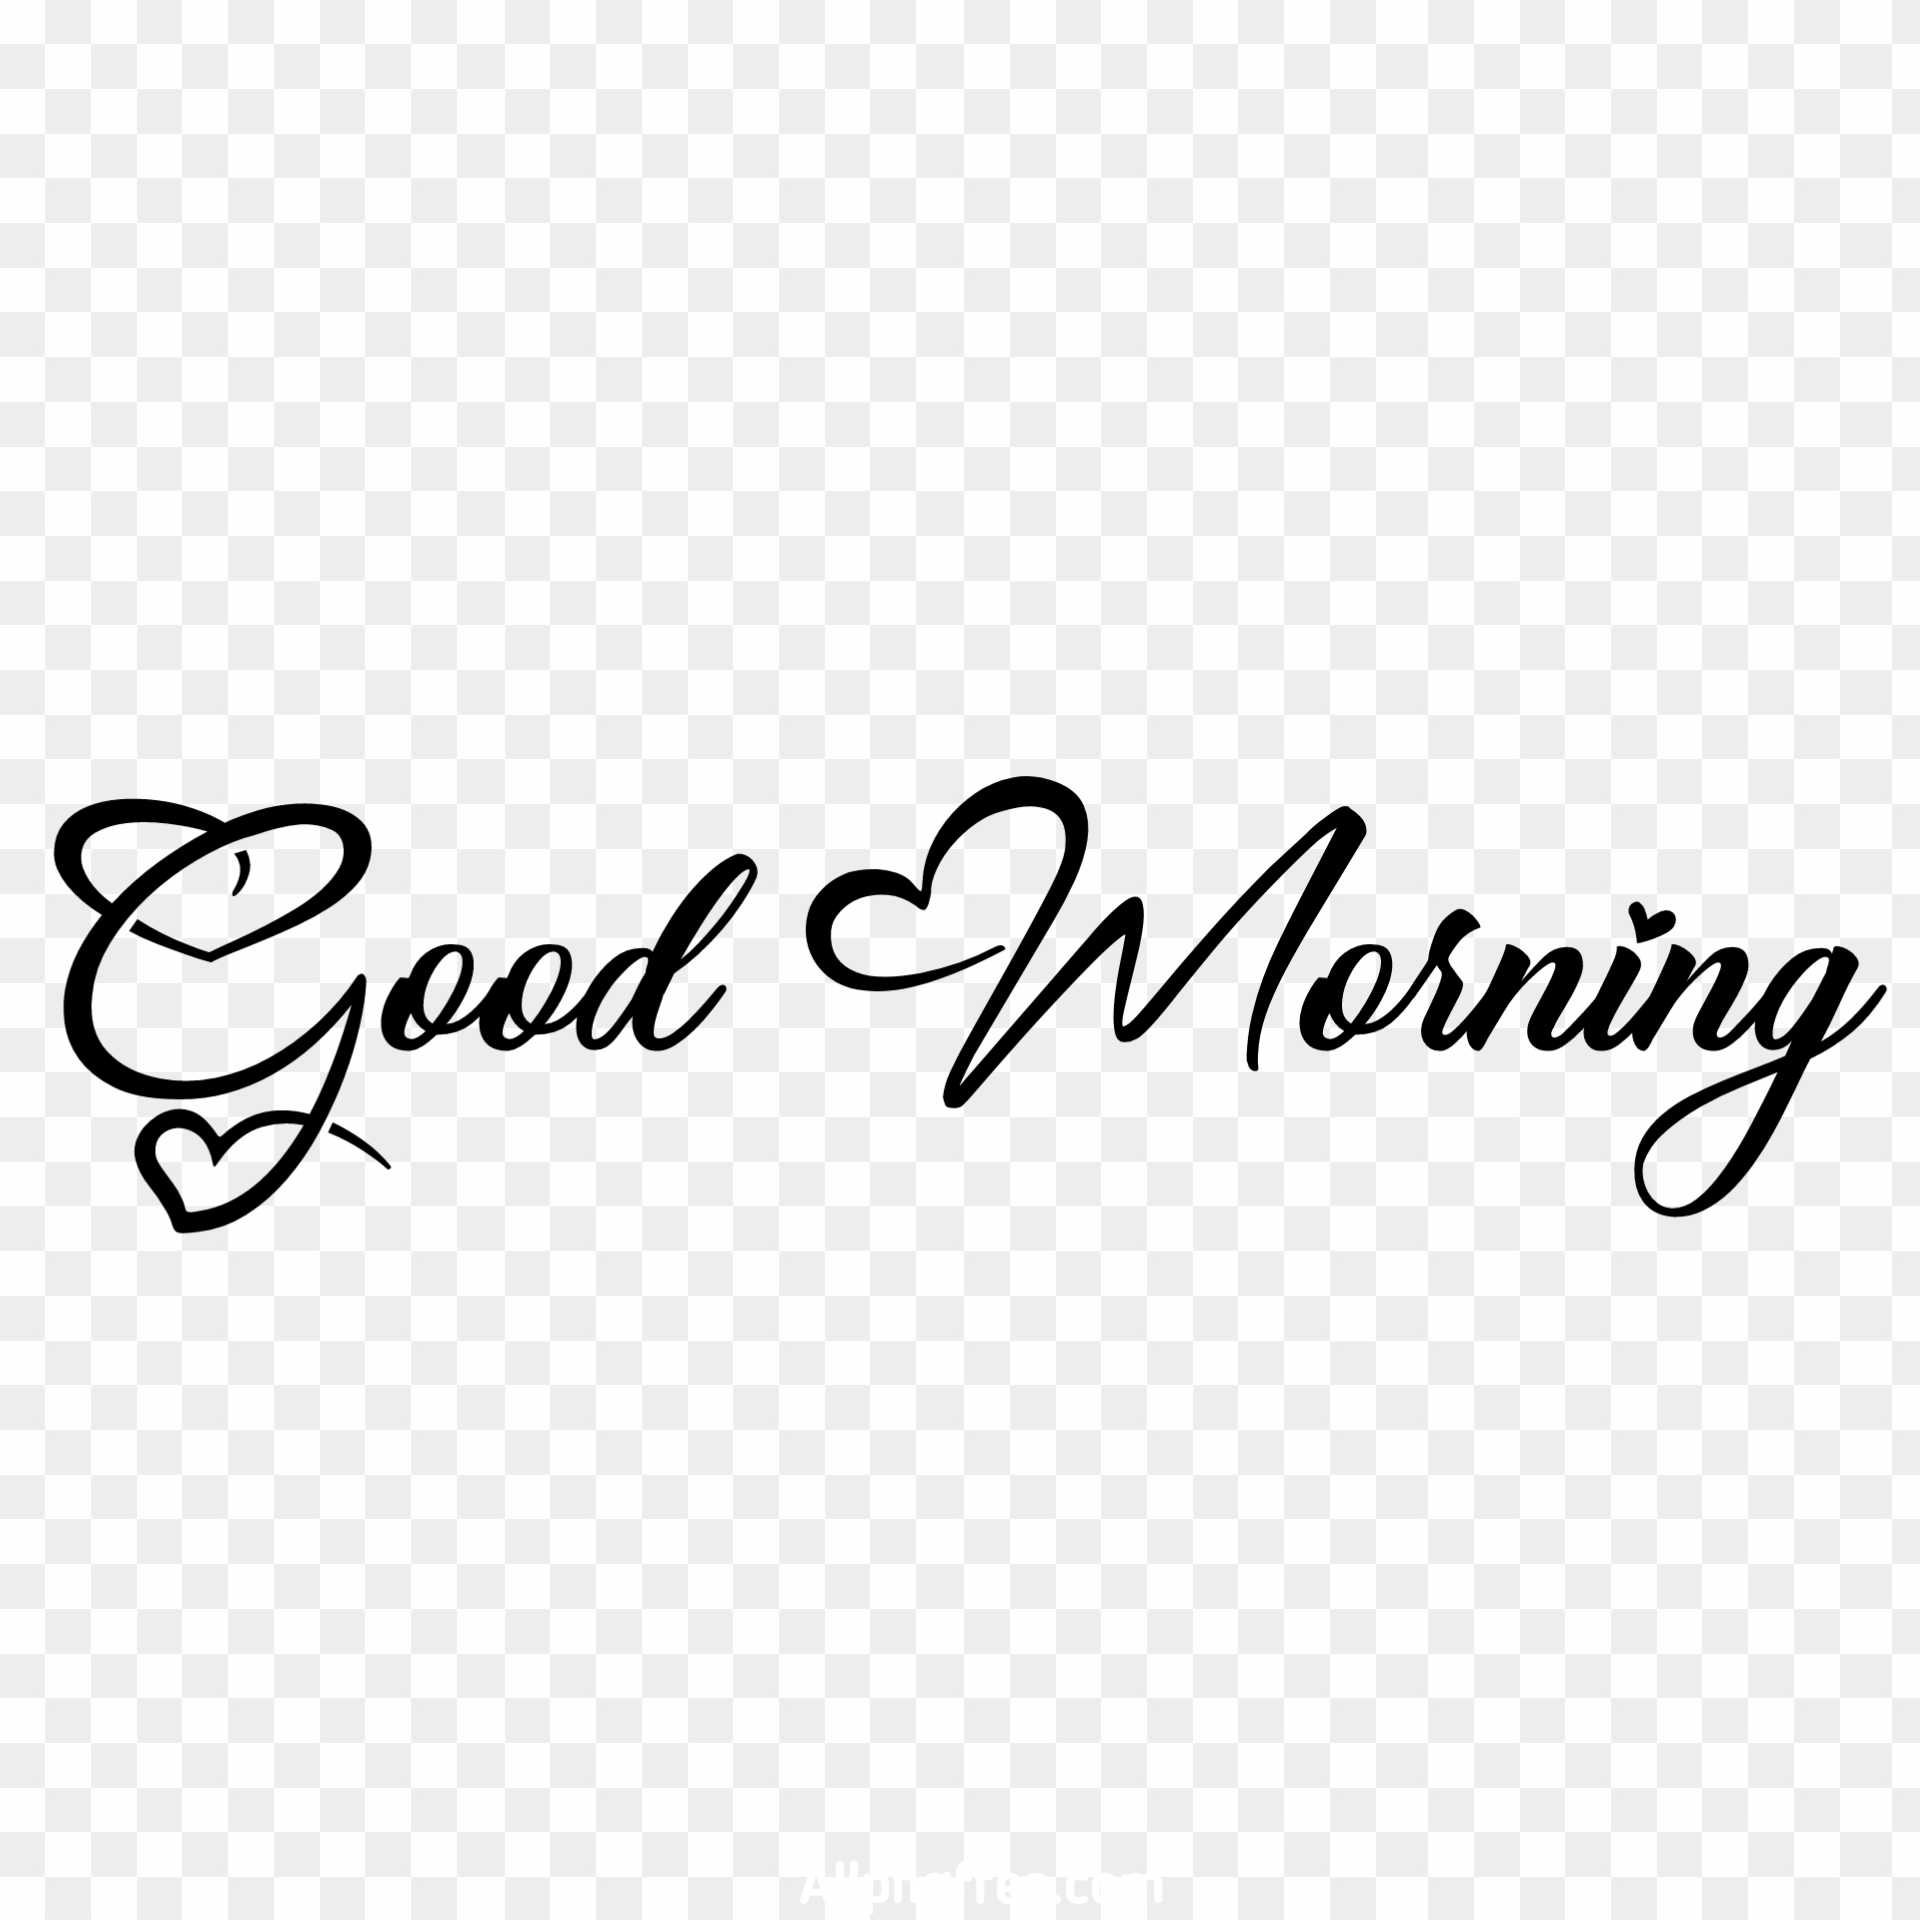 Good morning text PNG download